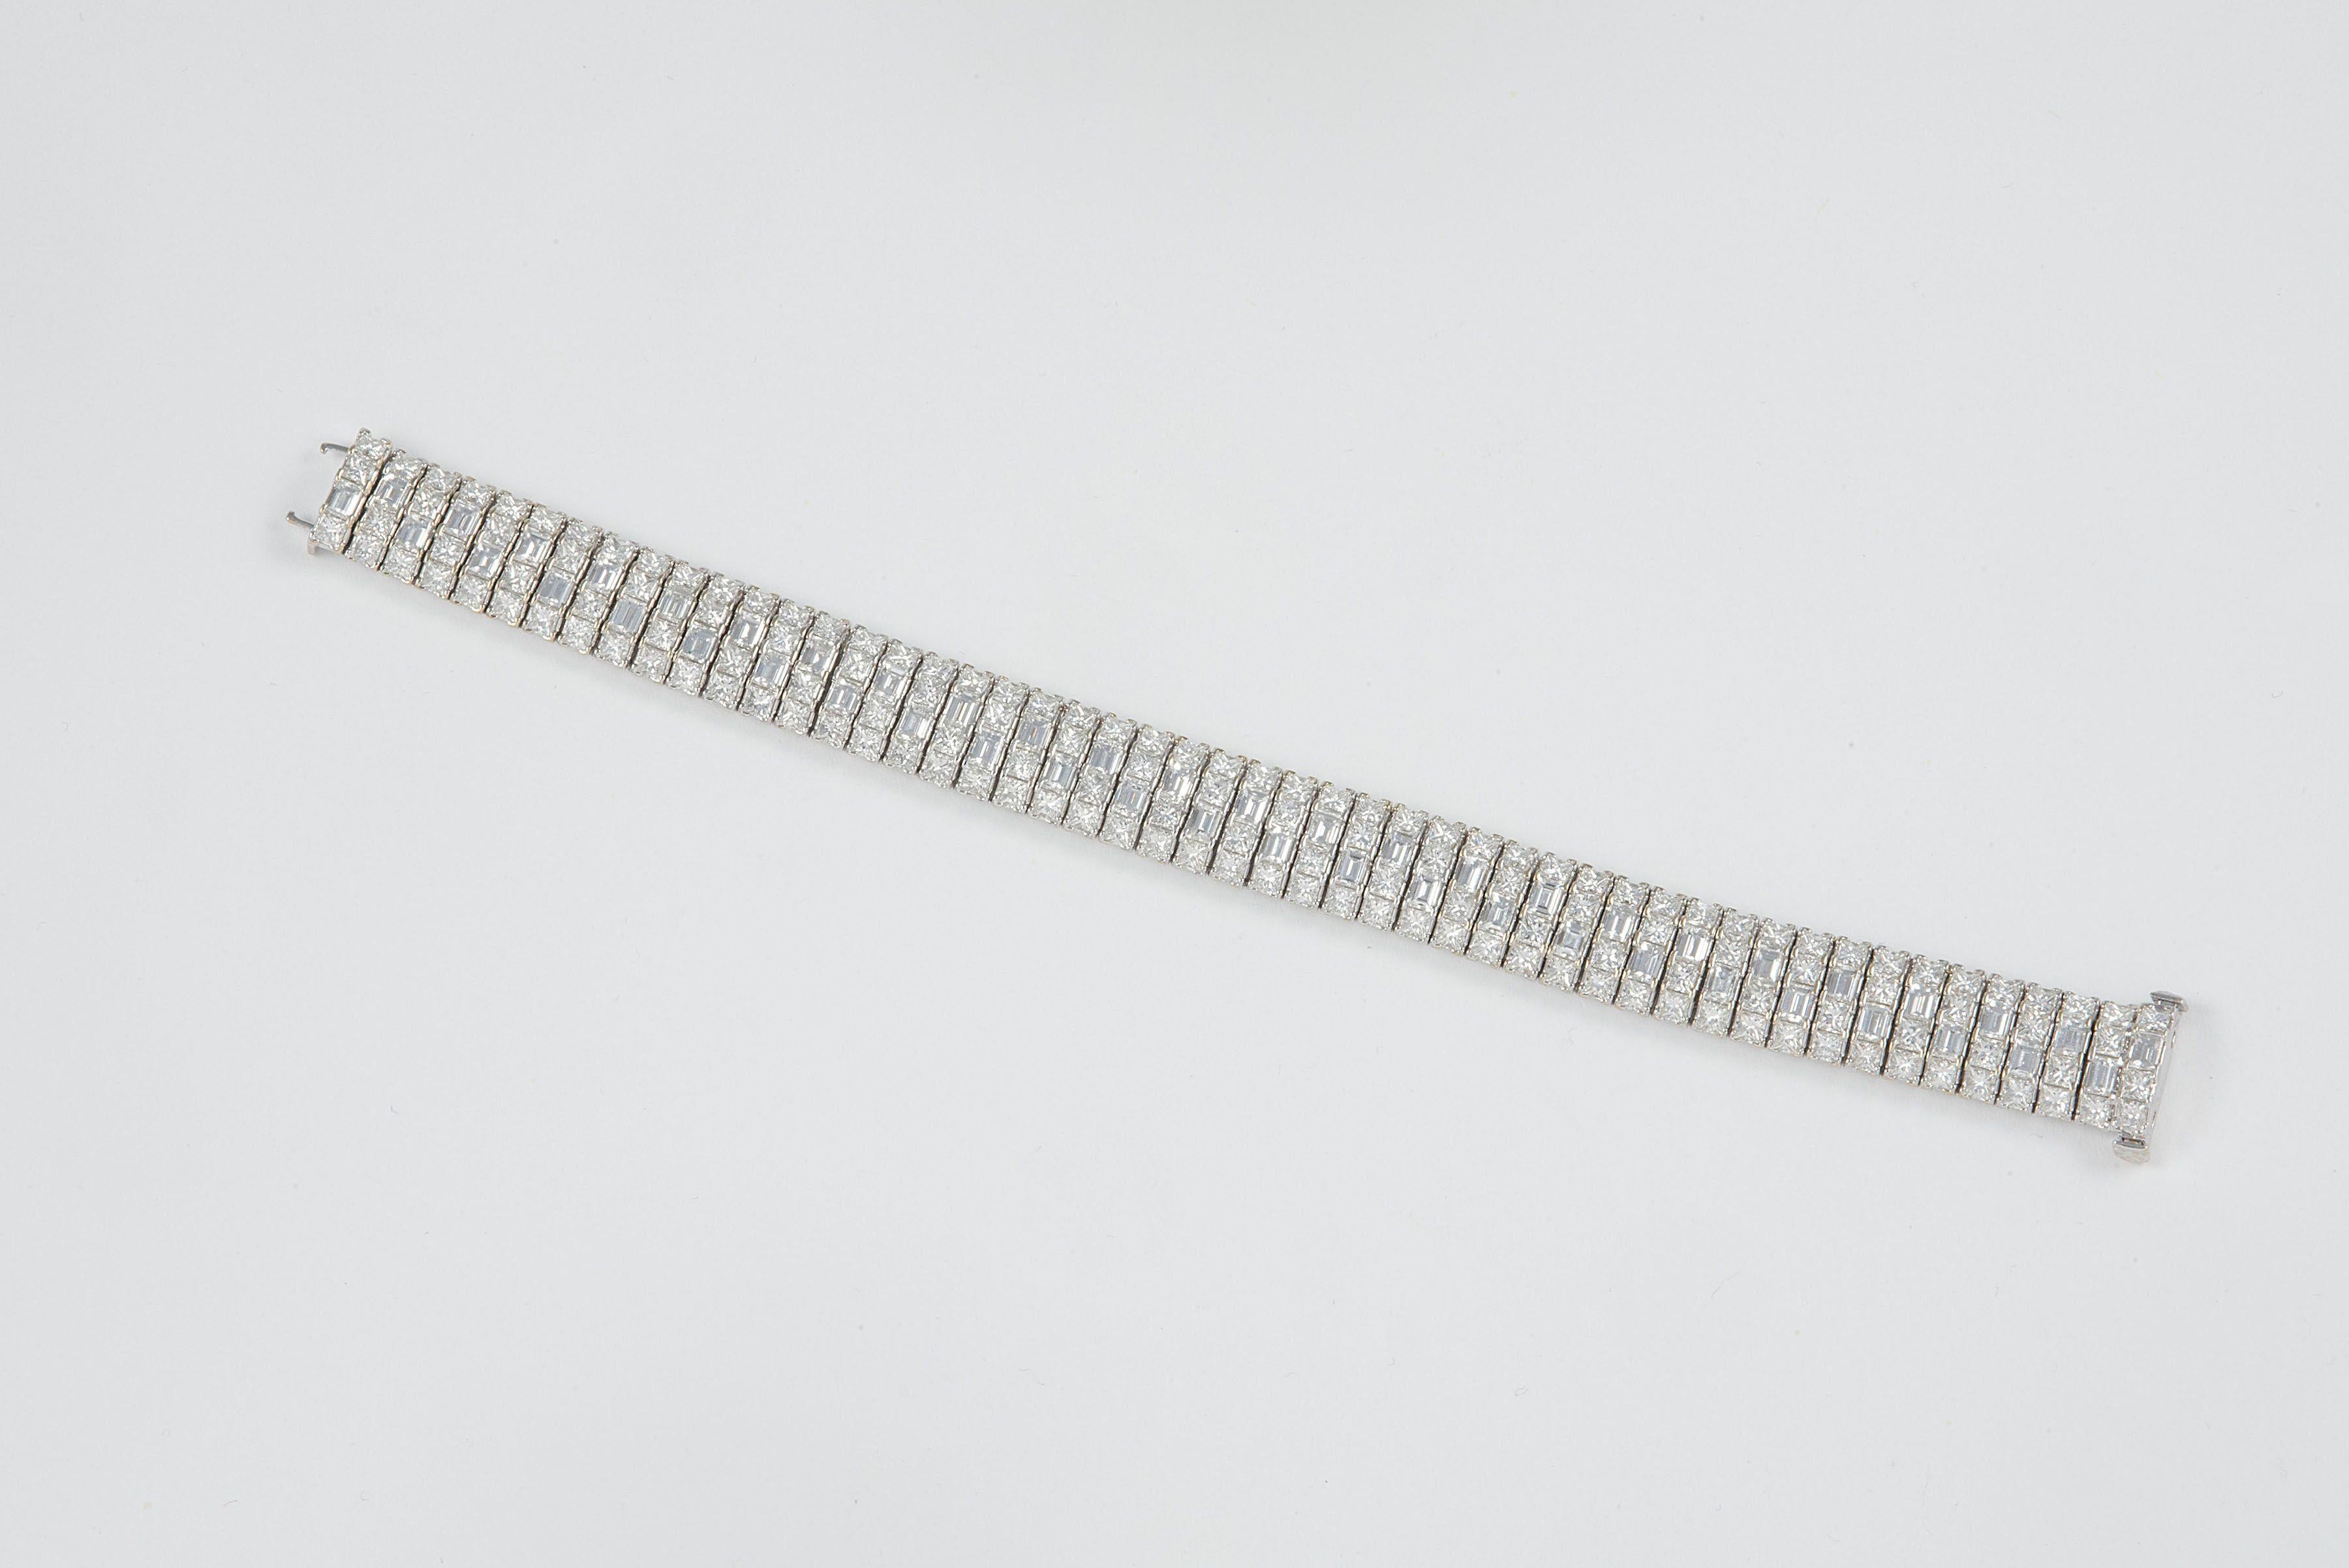 This exquisite custom made link bracelet handcrafted in 18kt white gold features four rows of alternating princess-cut and baguette diamonds totaling 19.32 carats, H-I color, VS clarity.
